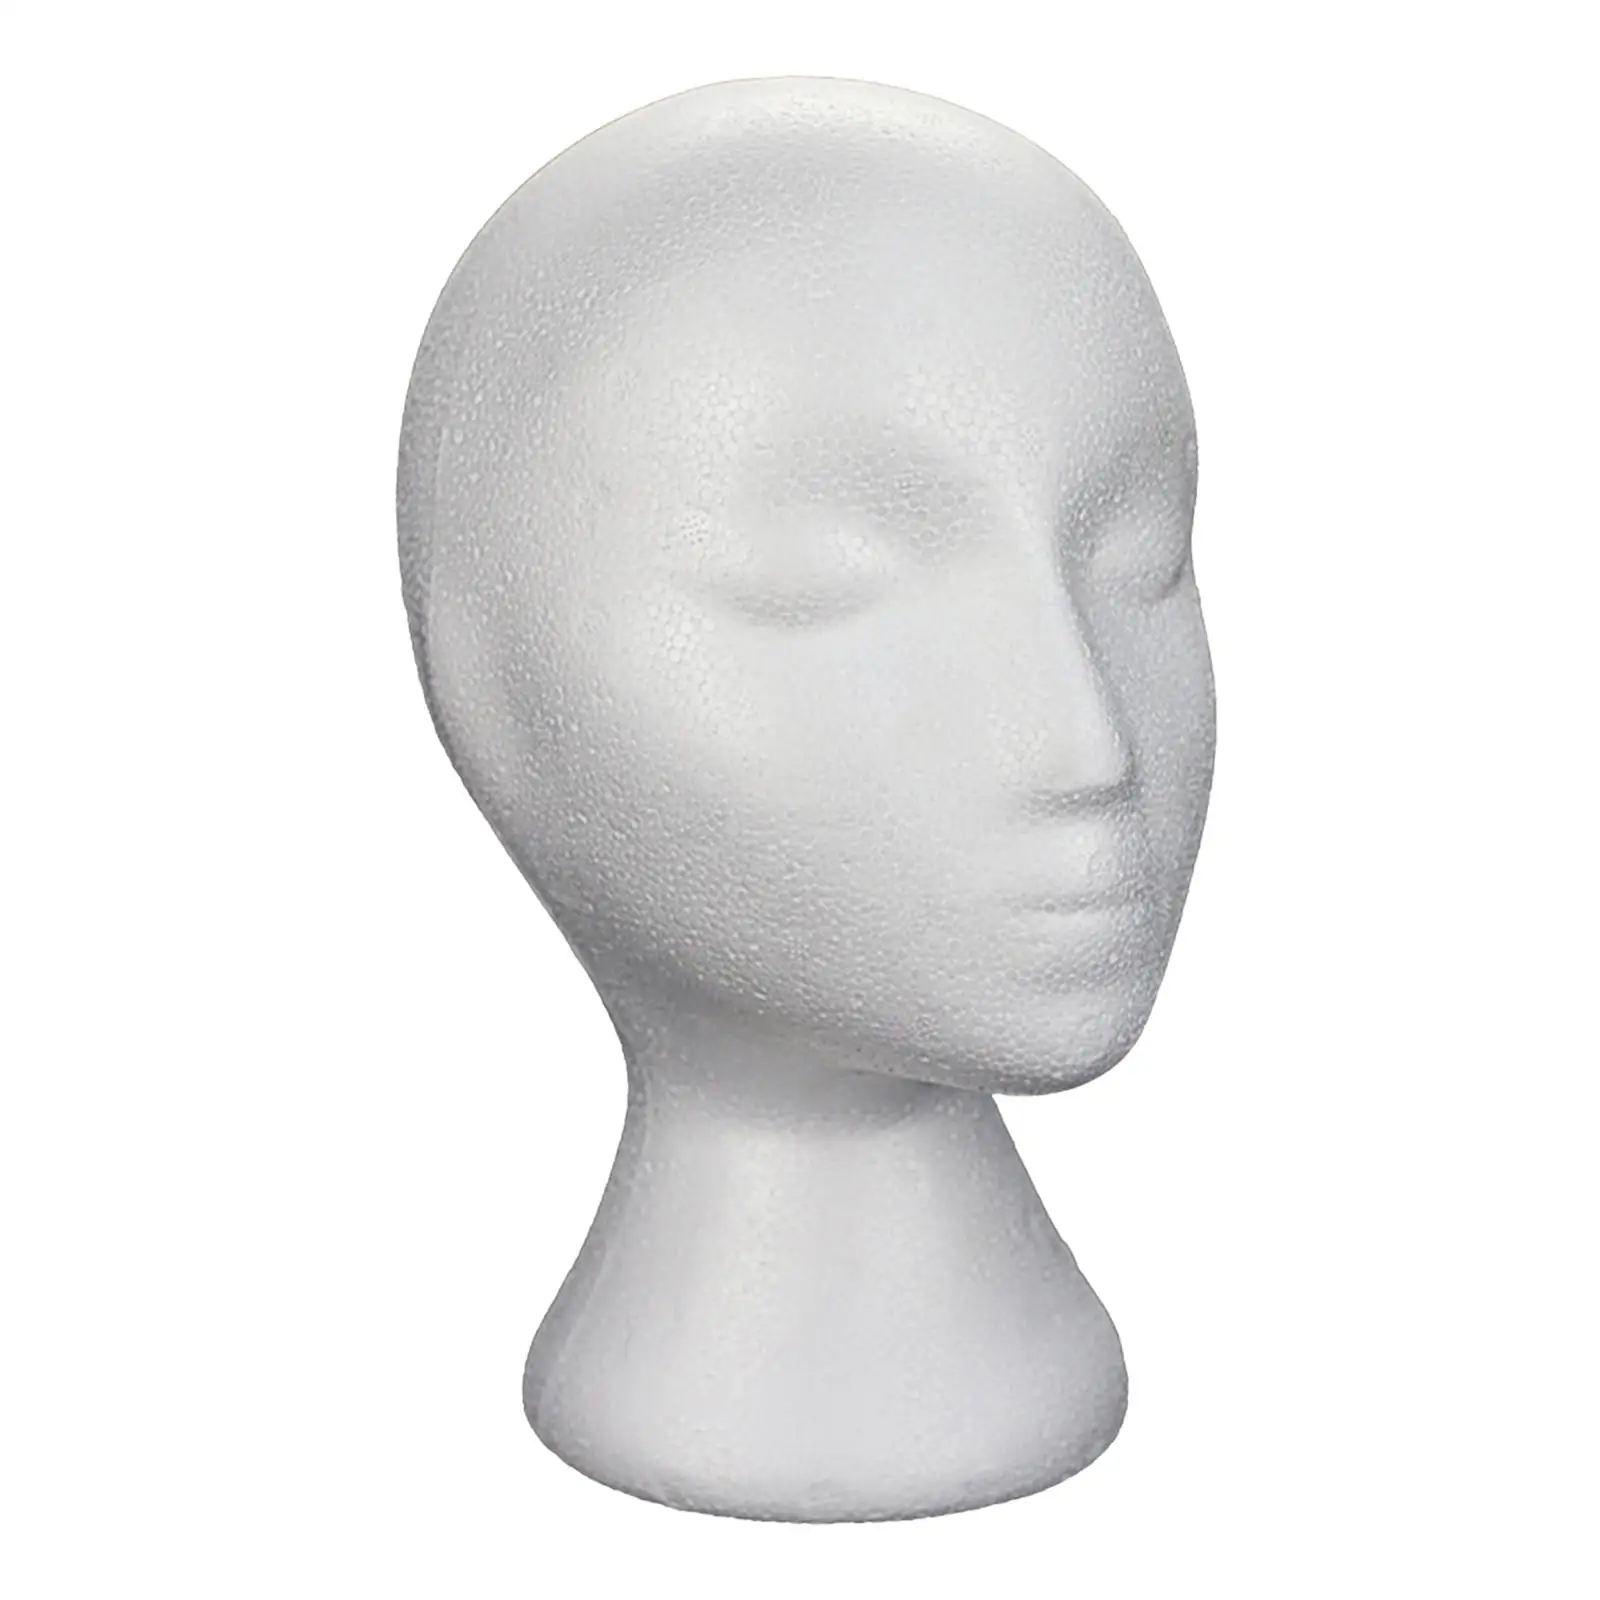 Foam Wig Head Professional White Multi Functional Female Mannequin Manikin Head Hat Display Stand Hat Rack for Salon Home Props